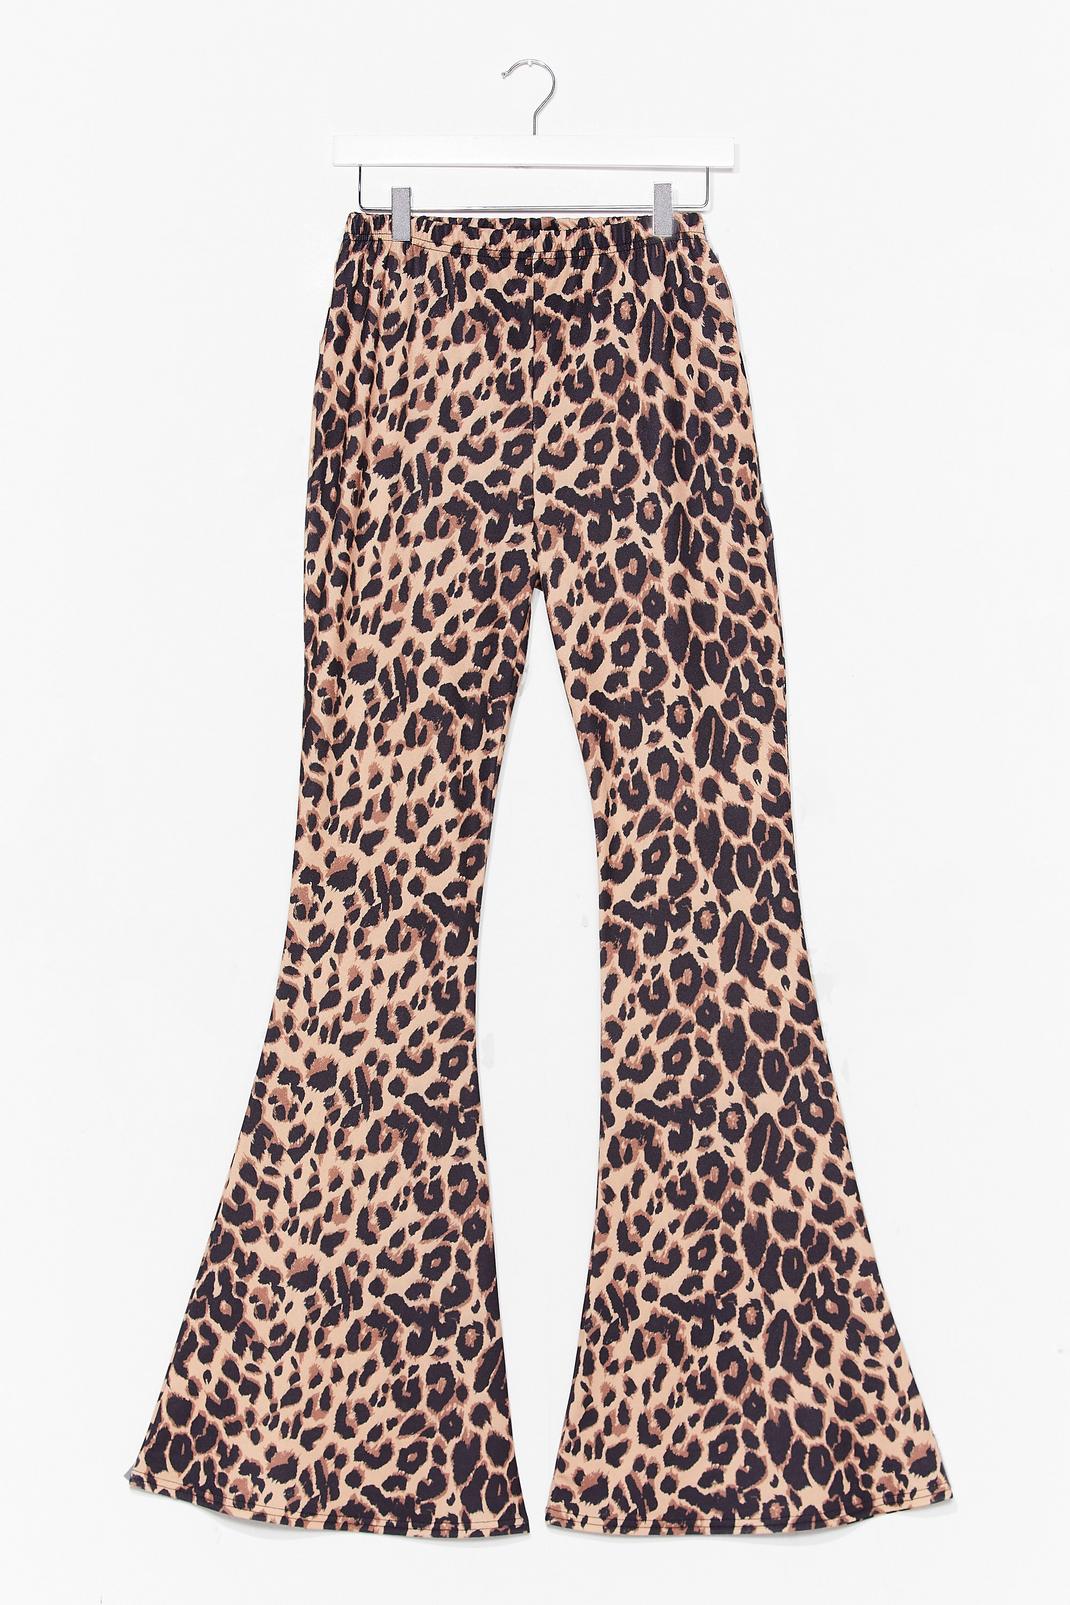 Wild Thoughts Leopard Flare Trousers image number 1